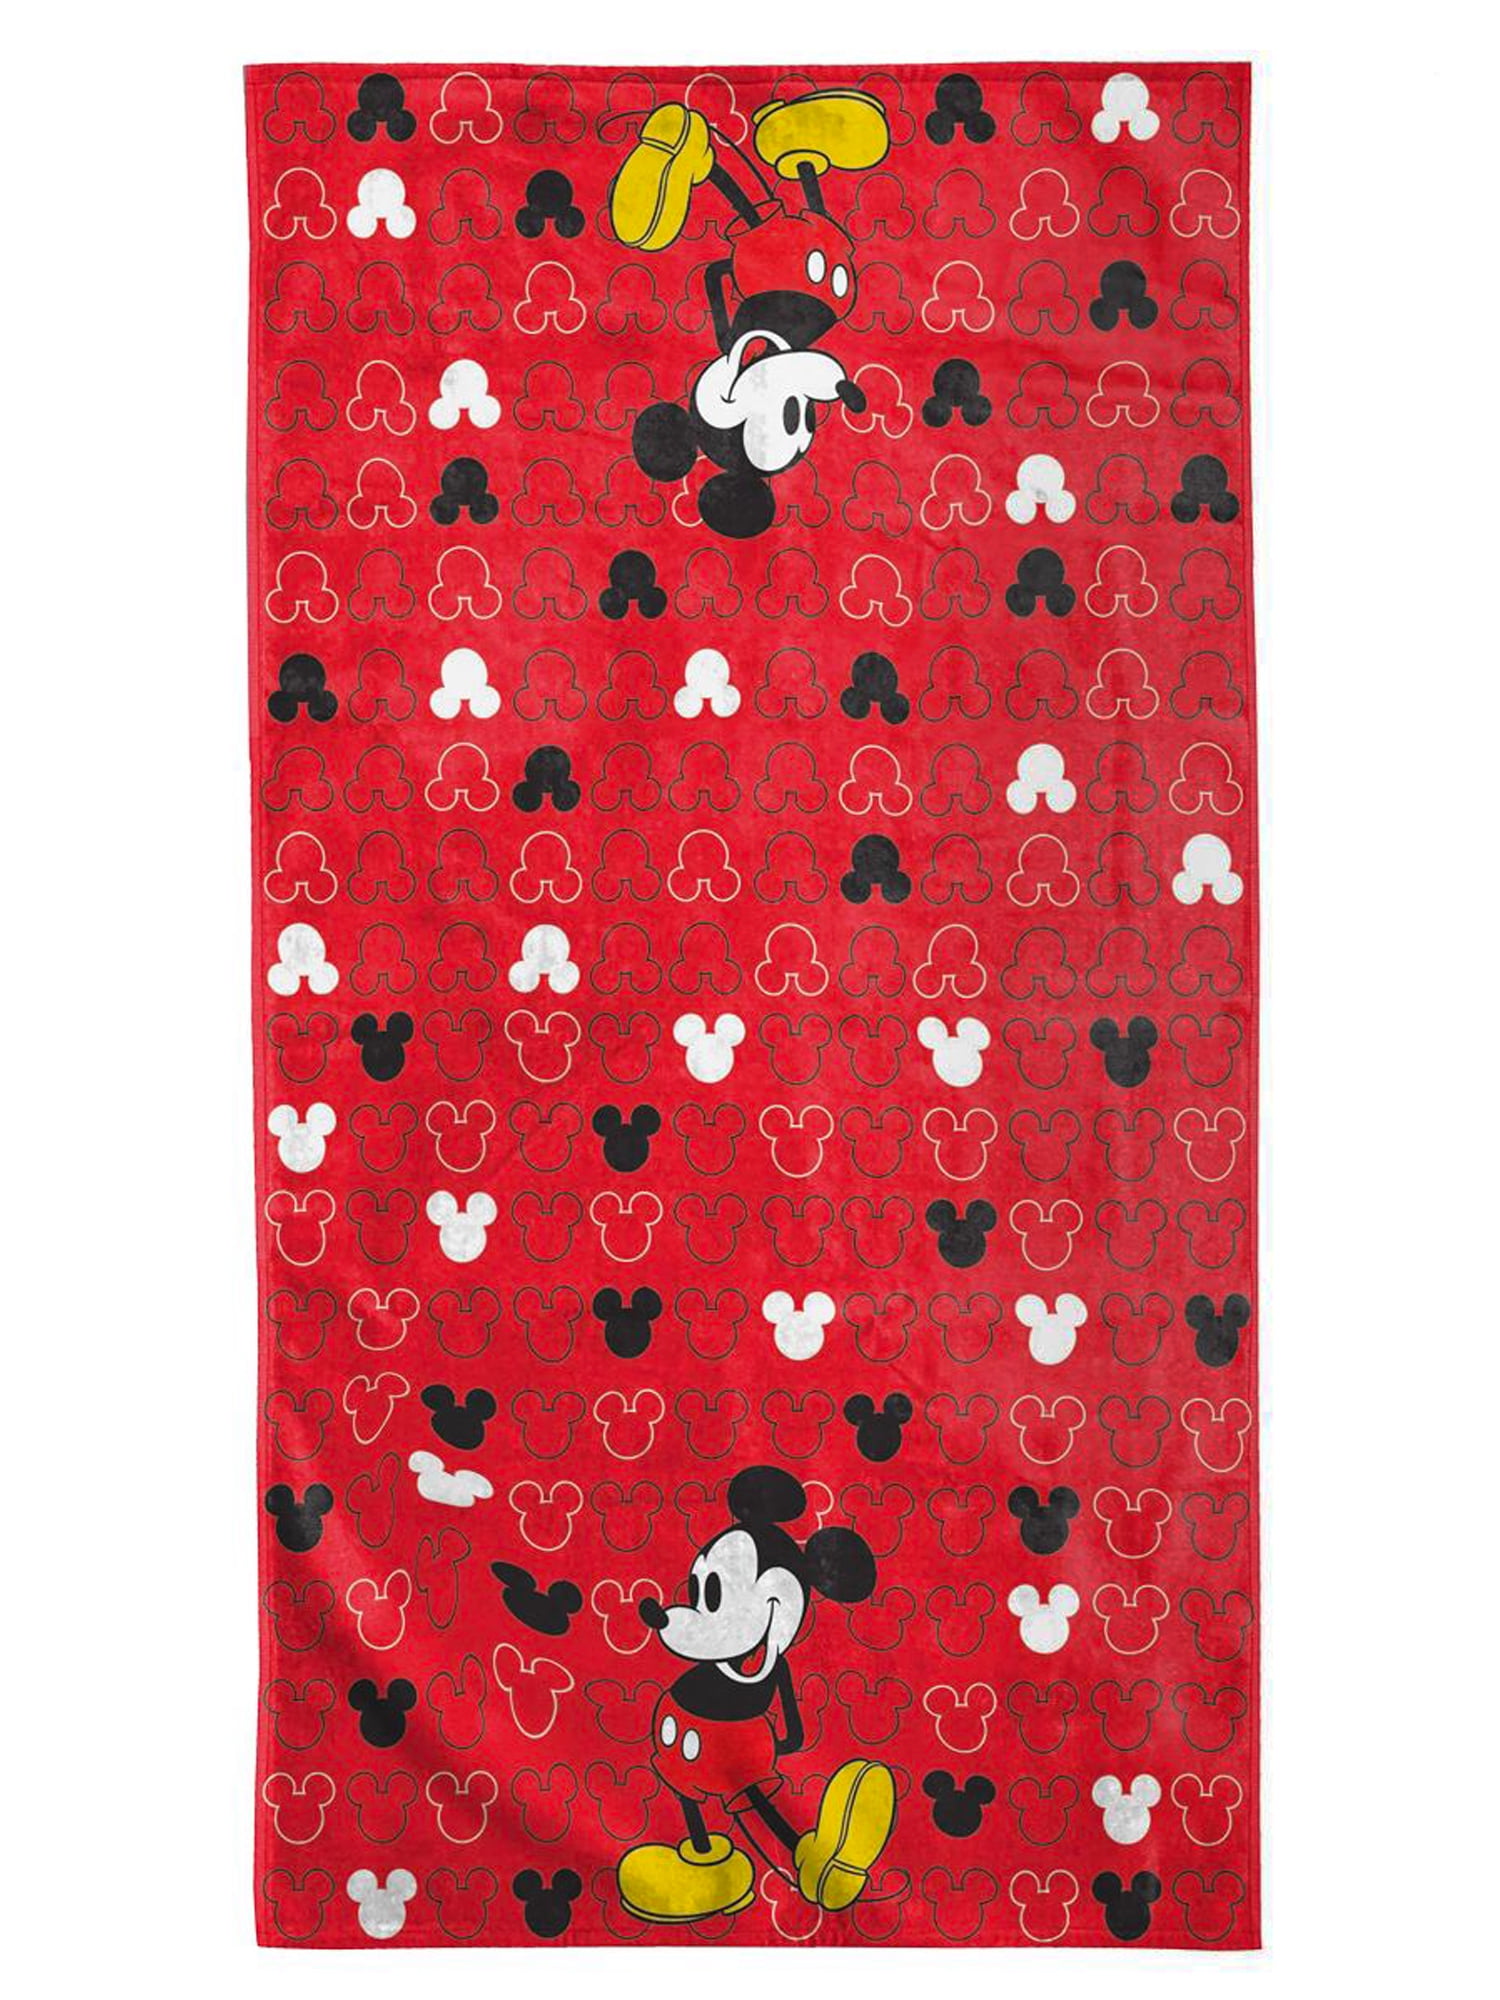 2016 Disney Mickey Mouse Hooded Towel Wrap 22 X 51 Red And White Stripes With Mickey